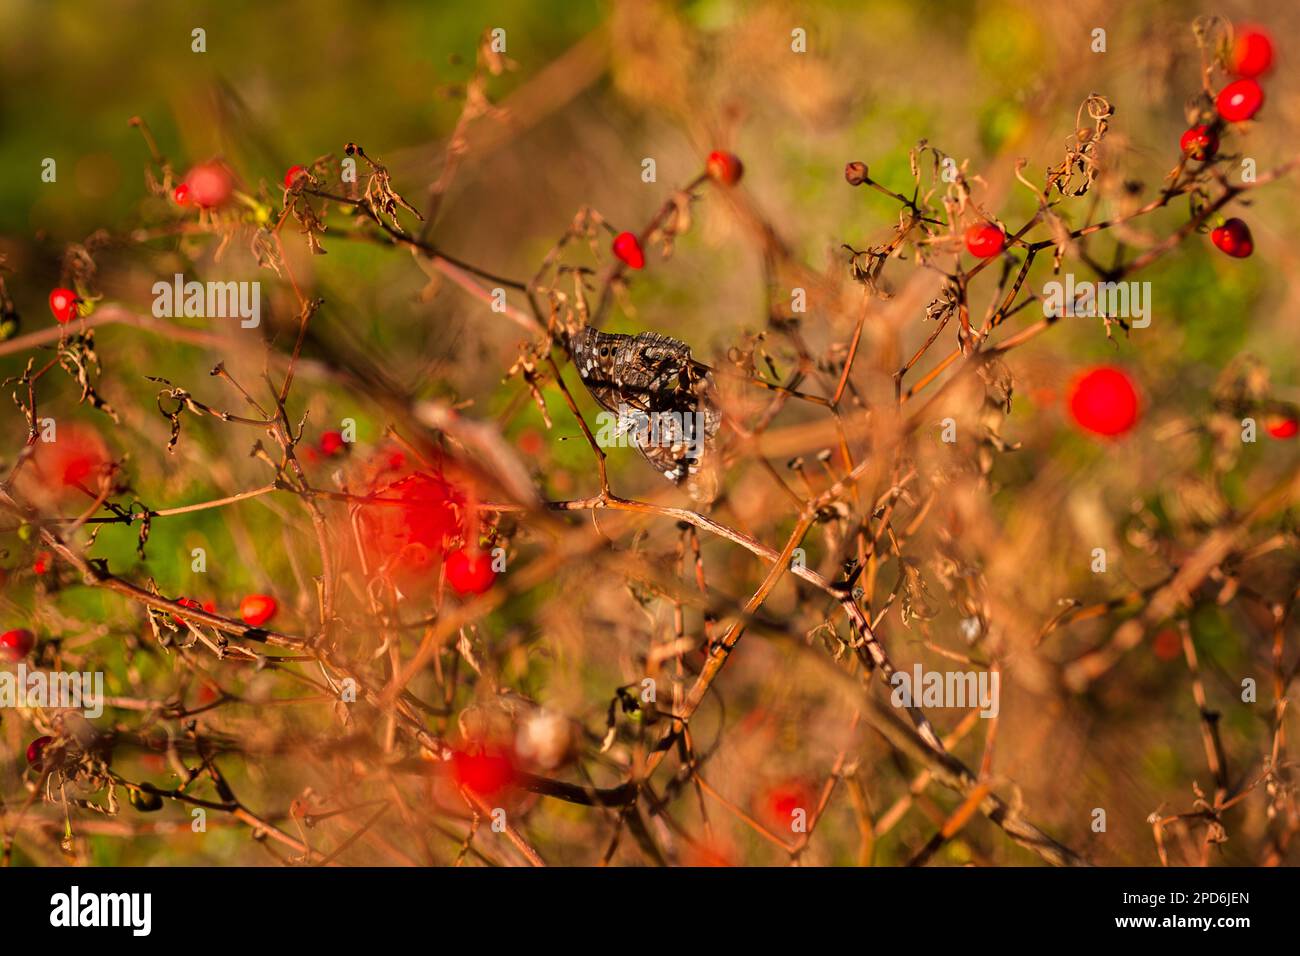 Chiltepin peppers, a wild variety of chili pepper, are seen growing on a dried plant during a harvest on a farm near Baviácora, Sonora, Mexico. Stock Photo